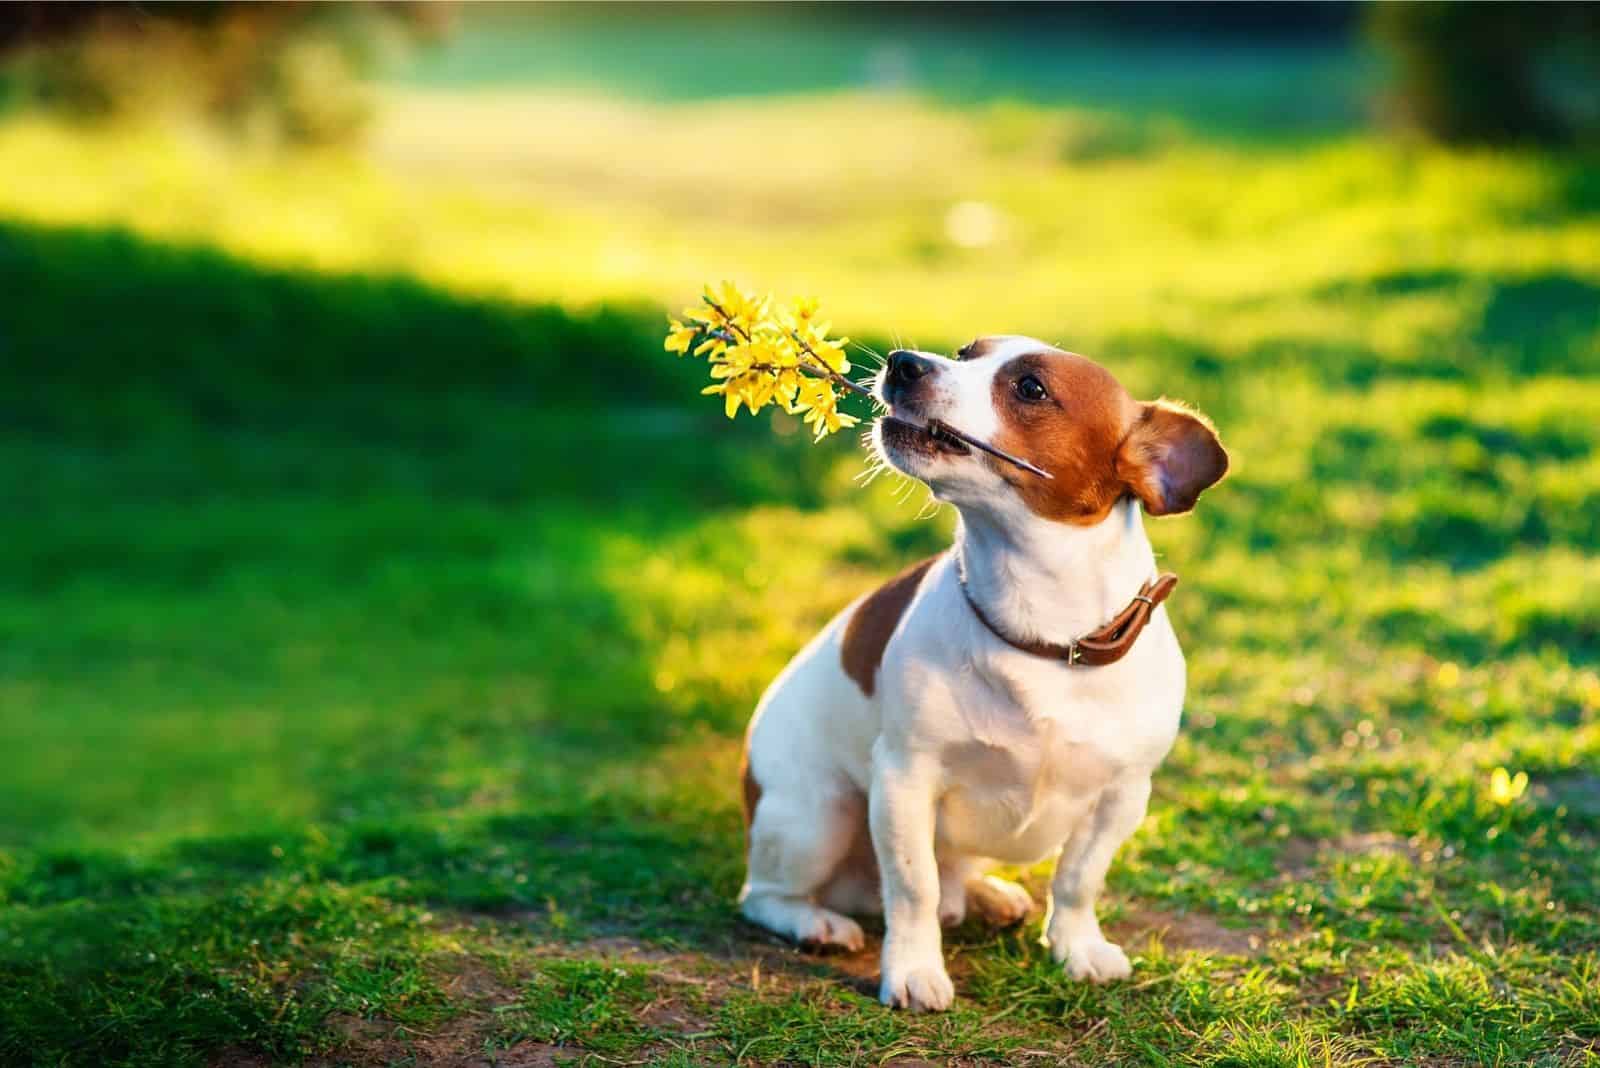 jack russel sitting in the green lawn with a branch in the mouth